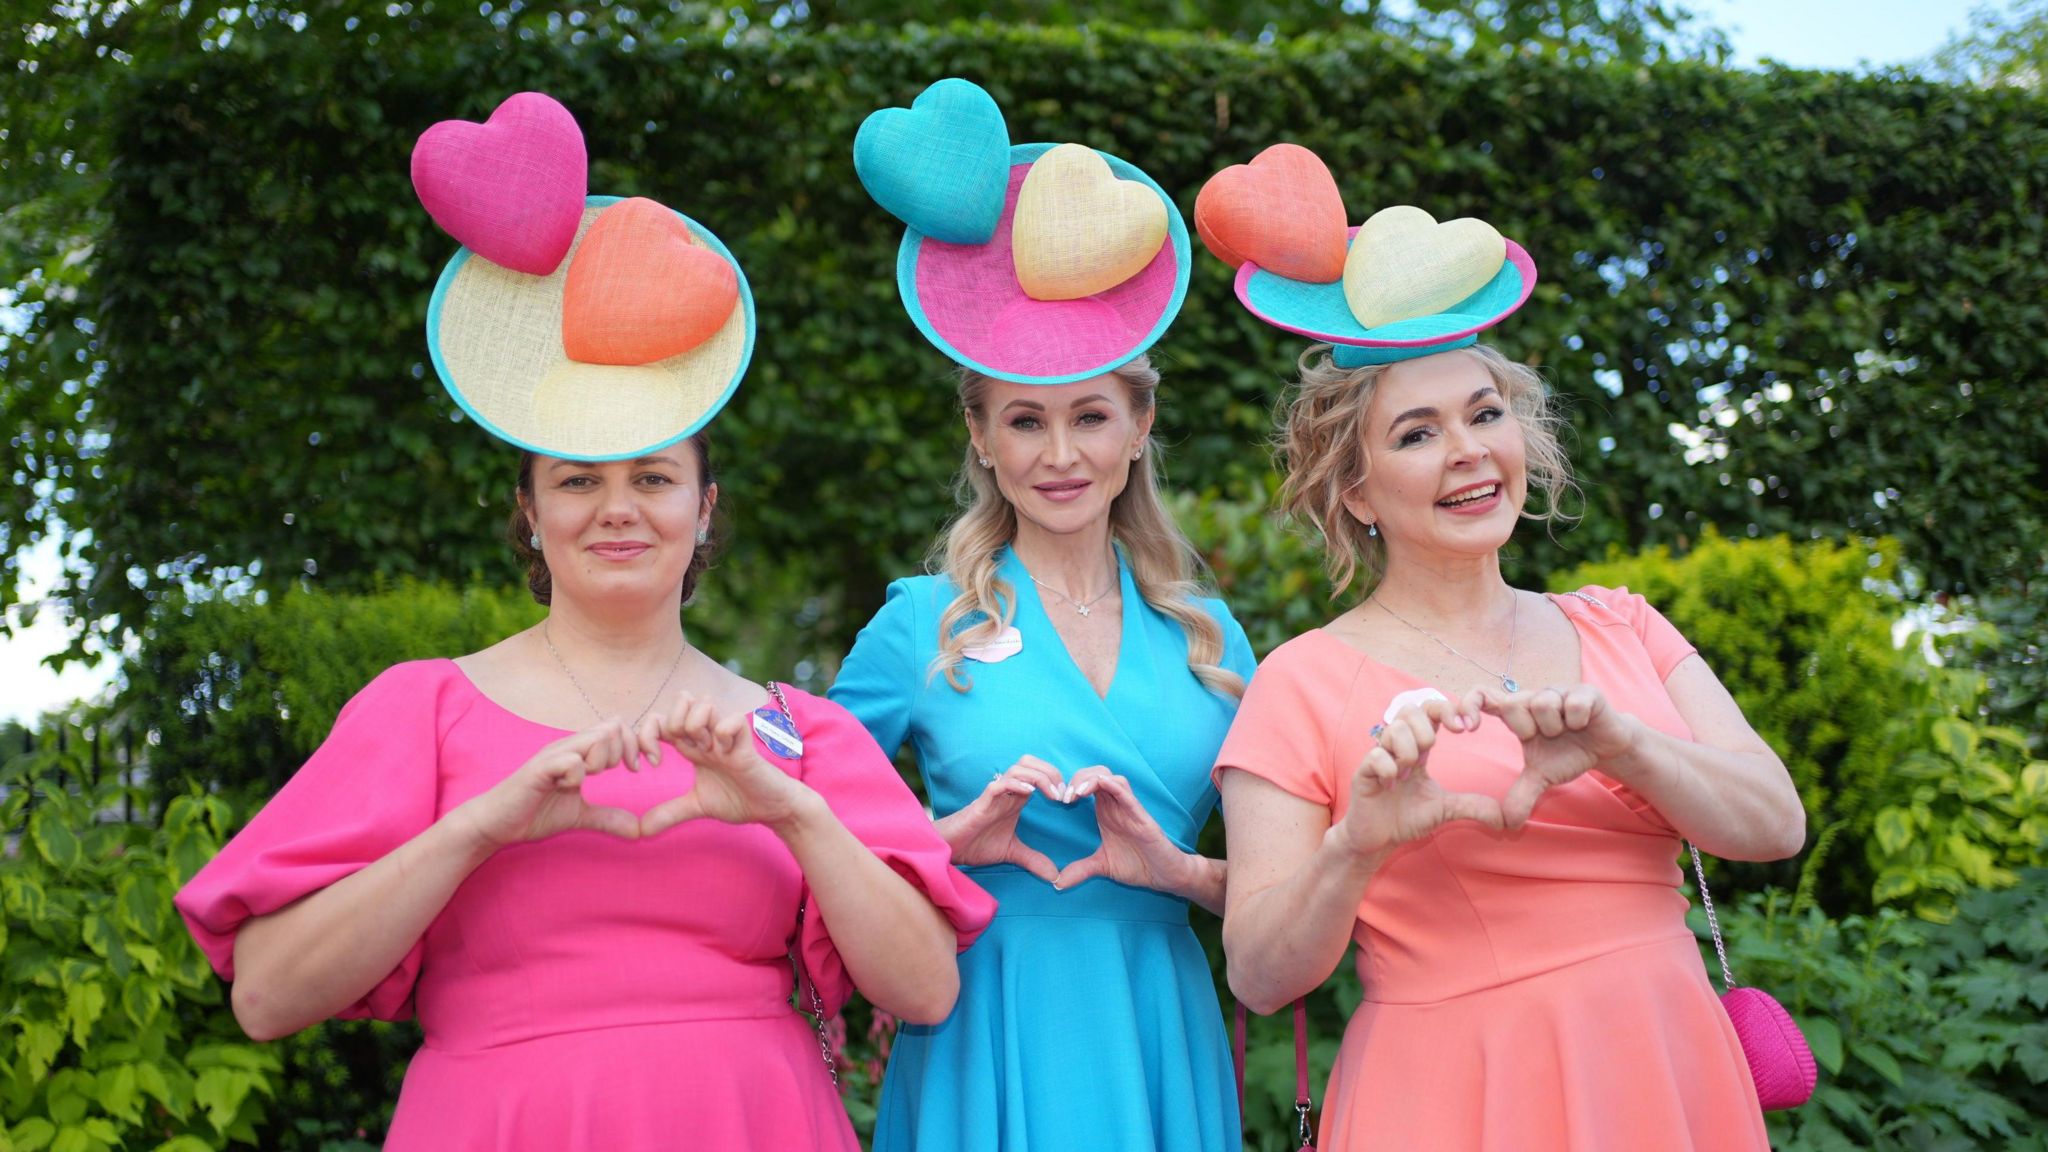 Anna Gilder, Svetlana Krarchenko and Dr Elena Karnovitch pictured wearing candy-coloured loveheart-themed hats